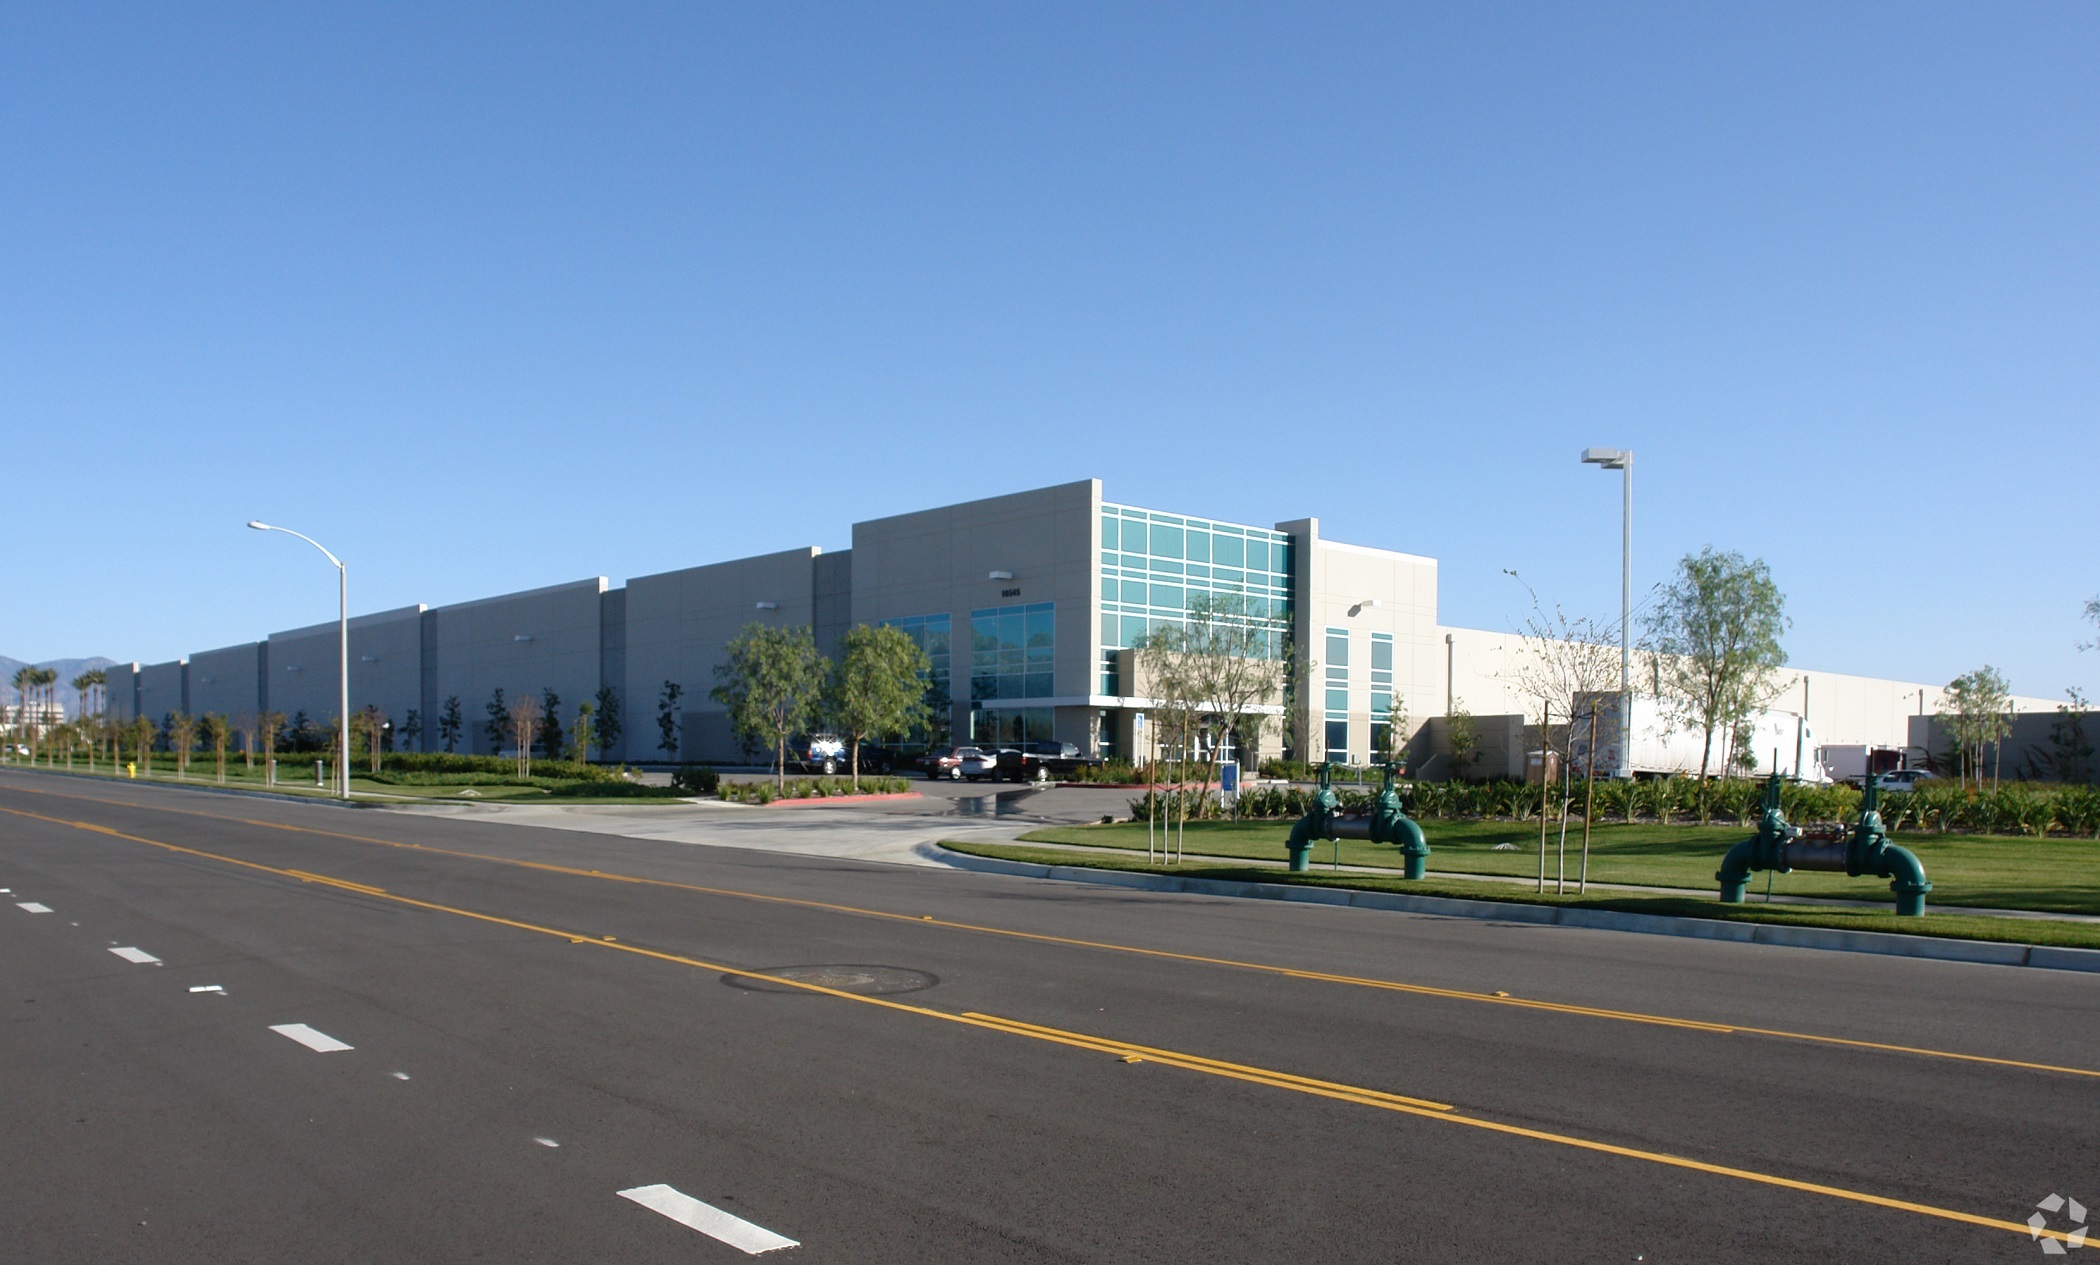 The 1.1 million-square-foot 10545 Production Ave. building is located in Fontana, California. (CoStar)